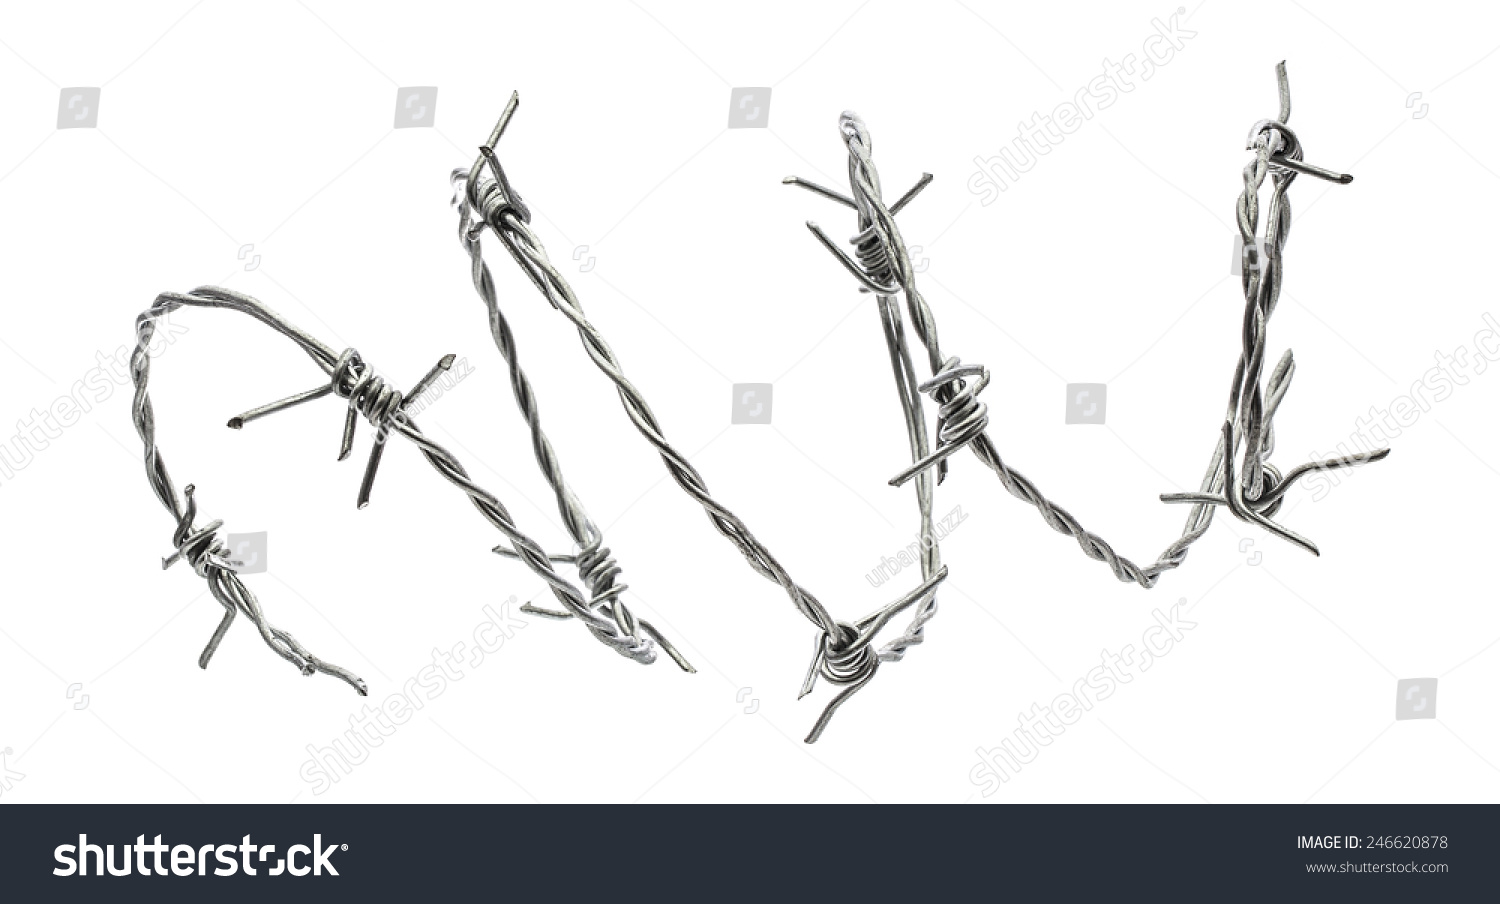 Barbed wire isolated on a white background #246620878